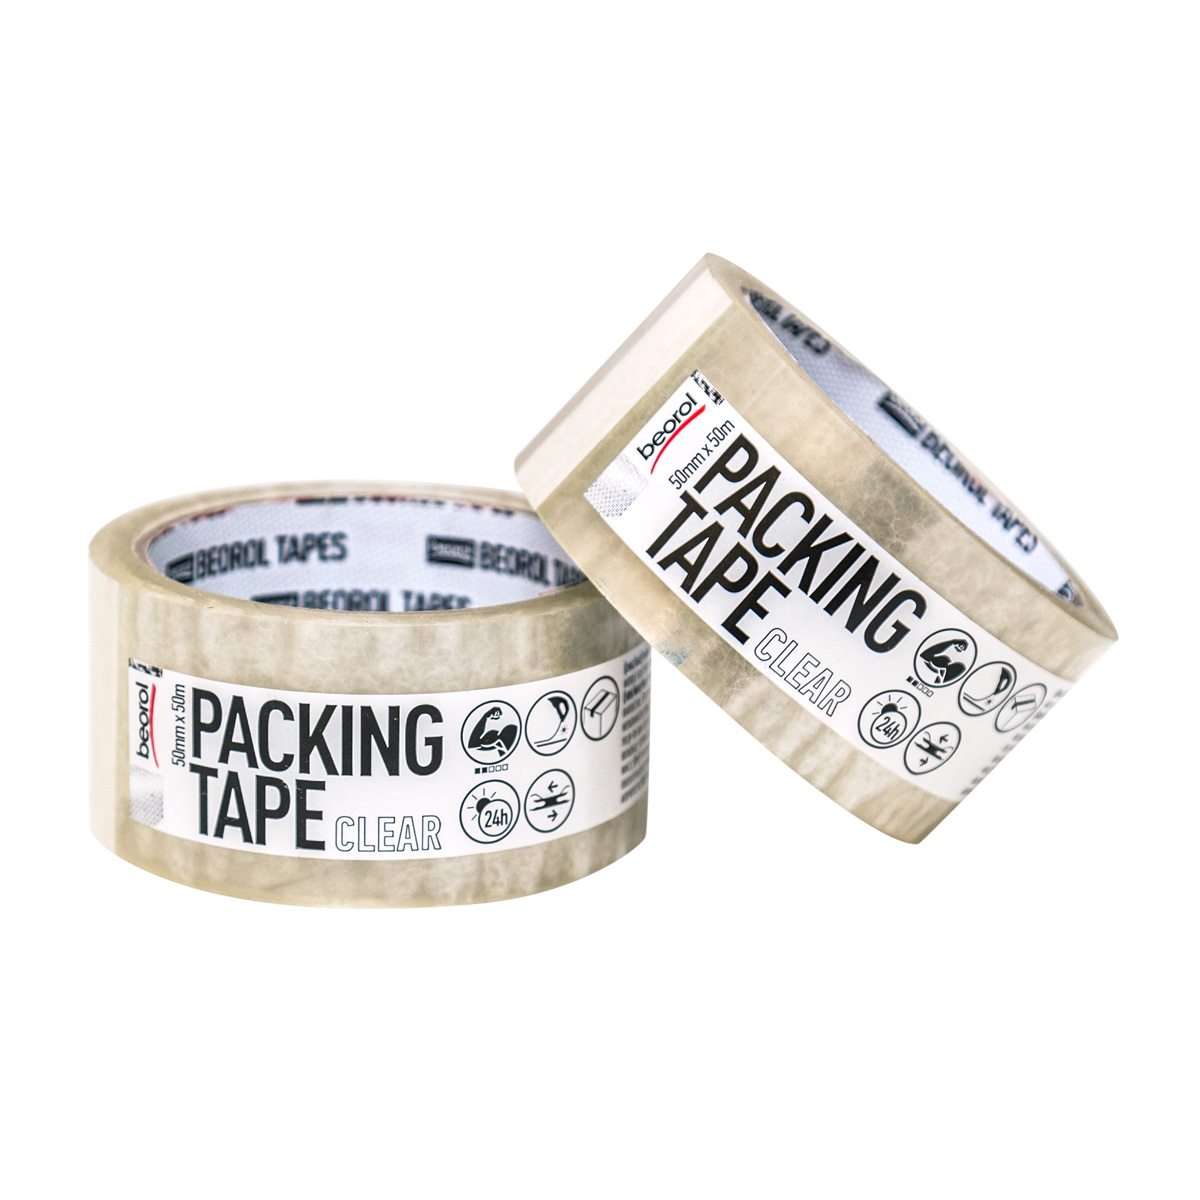 Packing Tape Roll